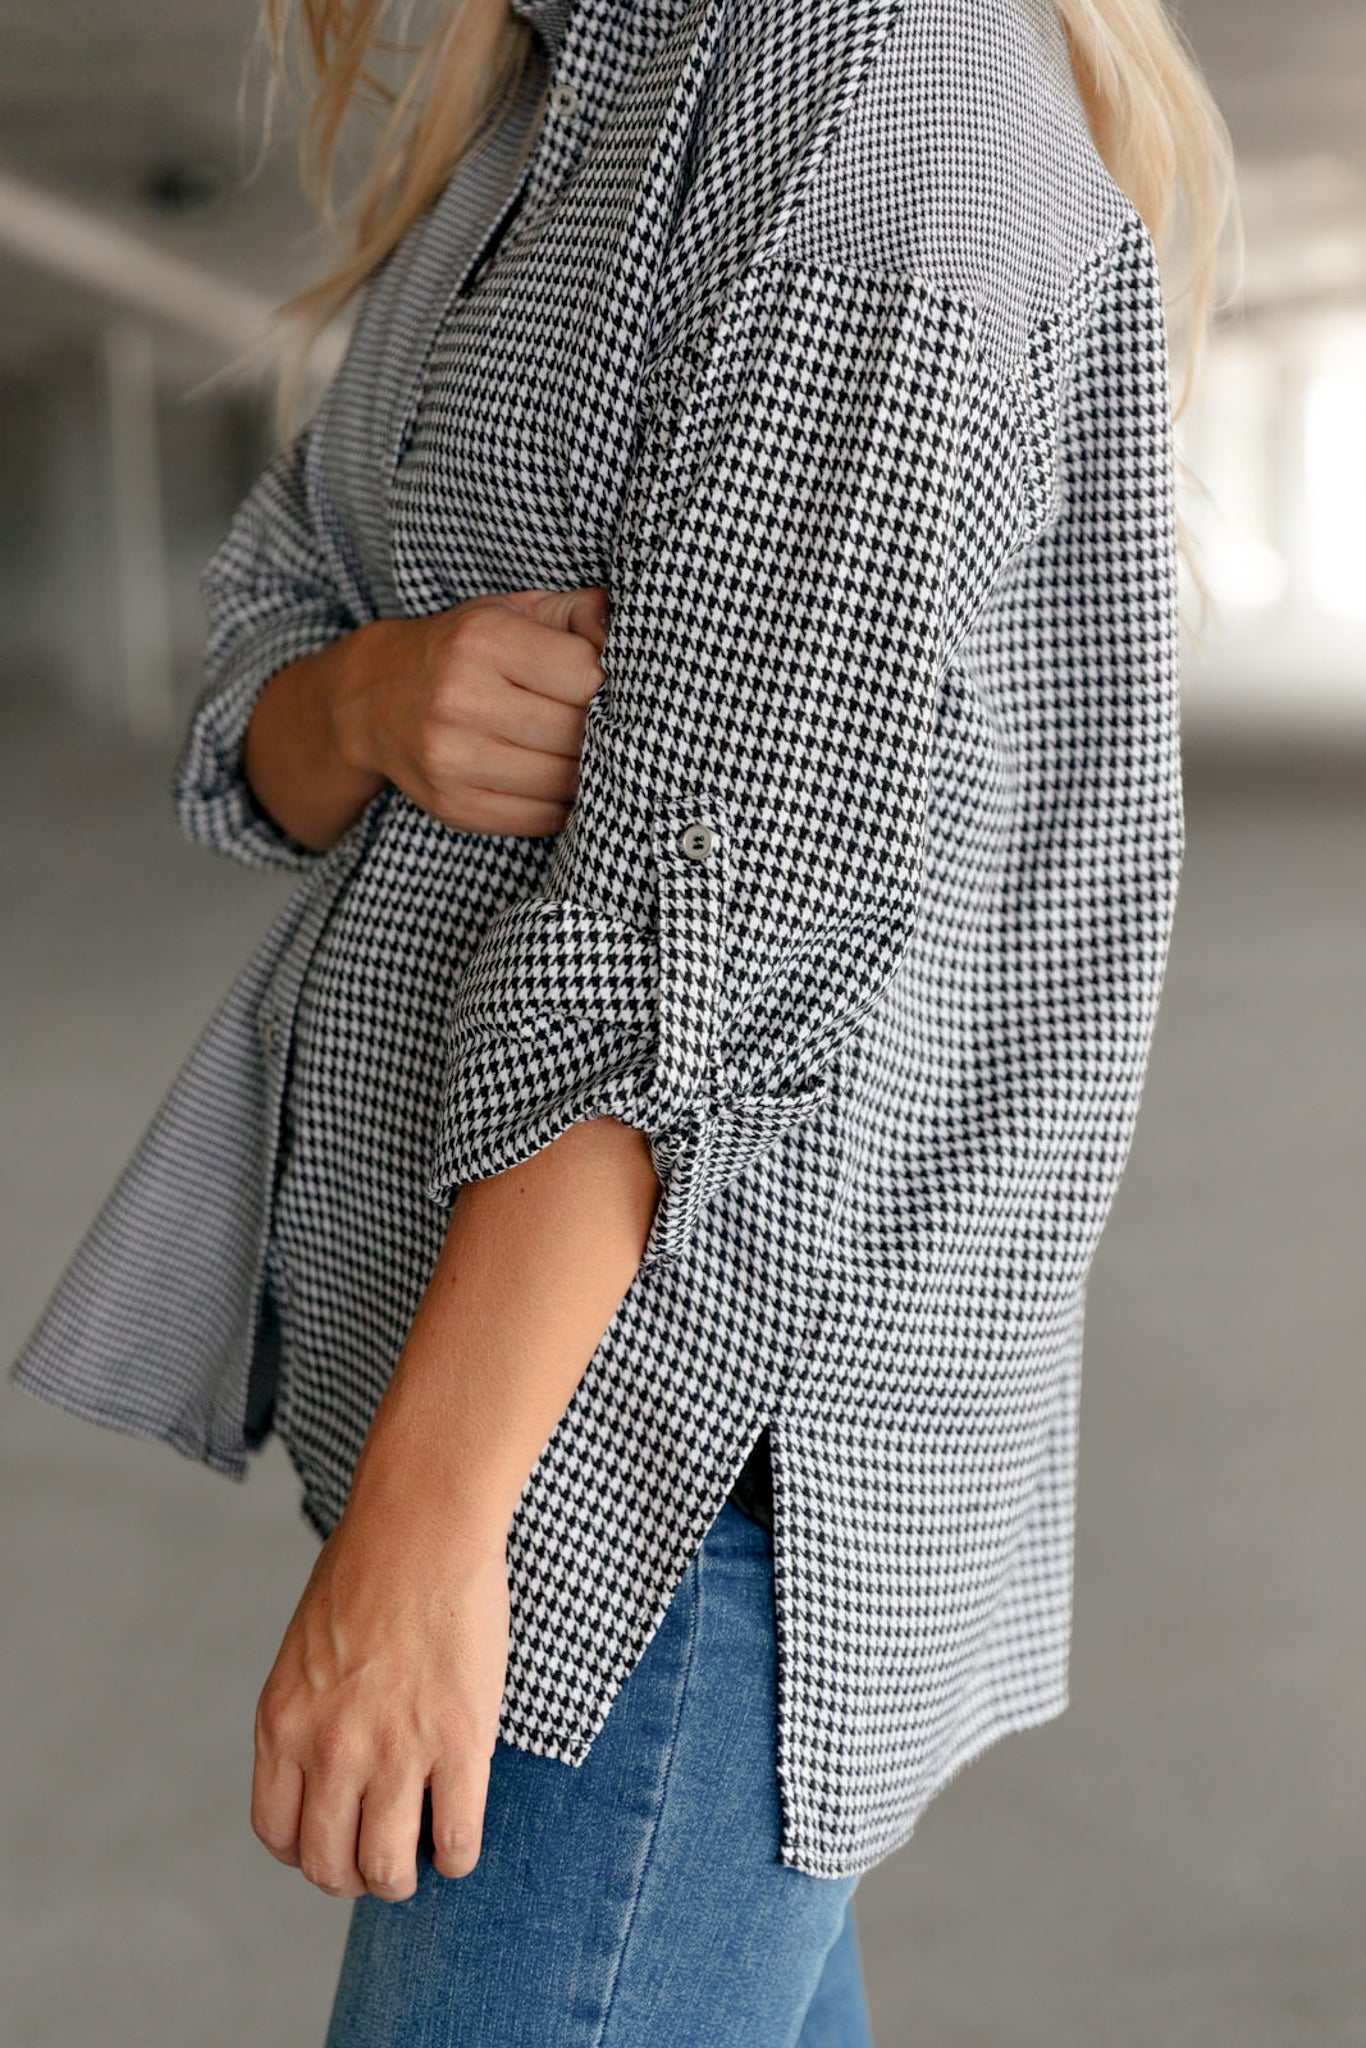 Mix it Up Houndstooth Button Up Top   